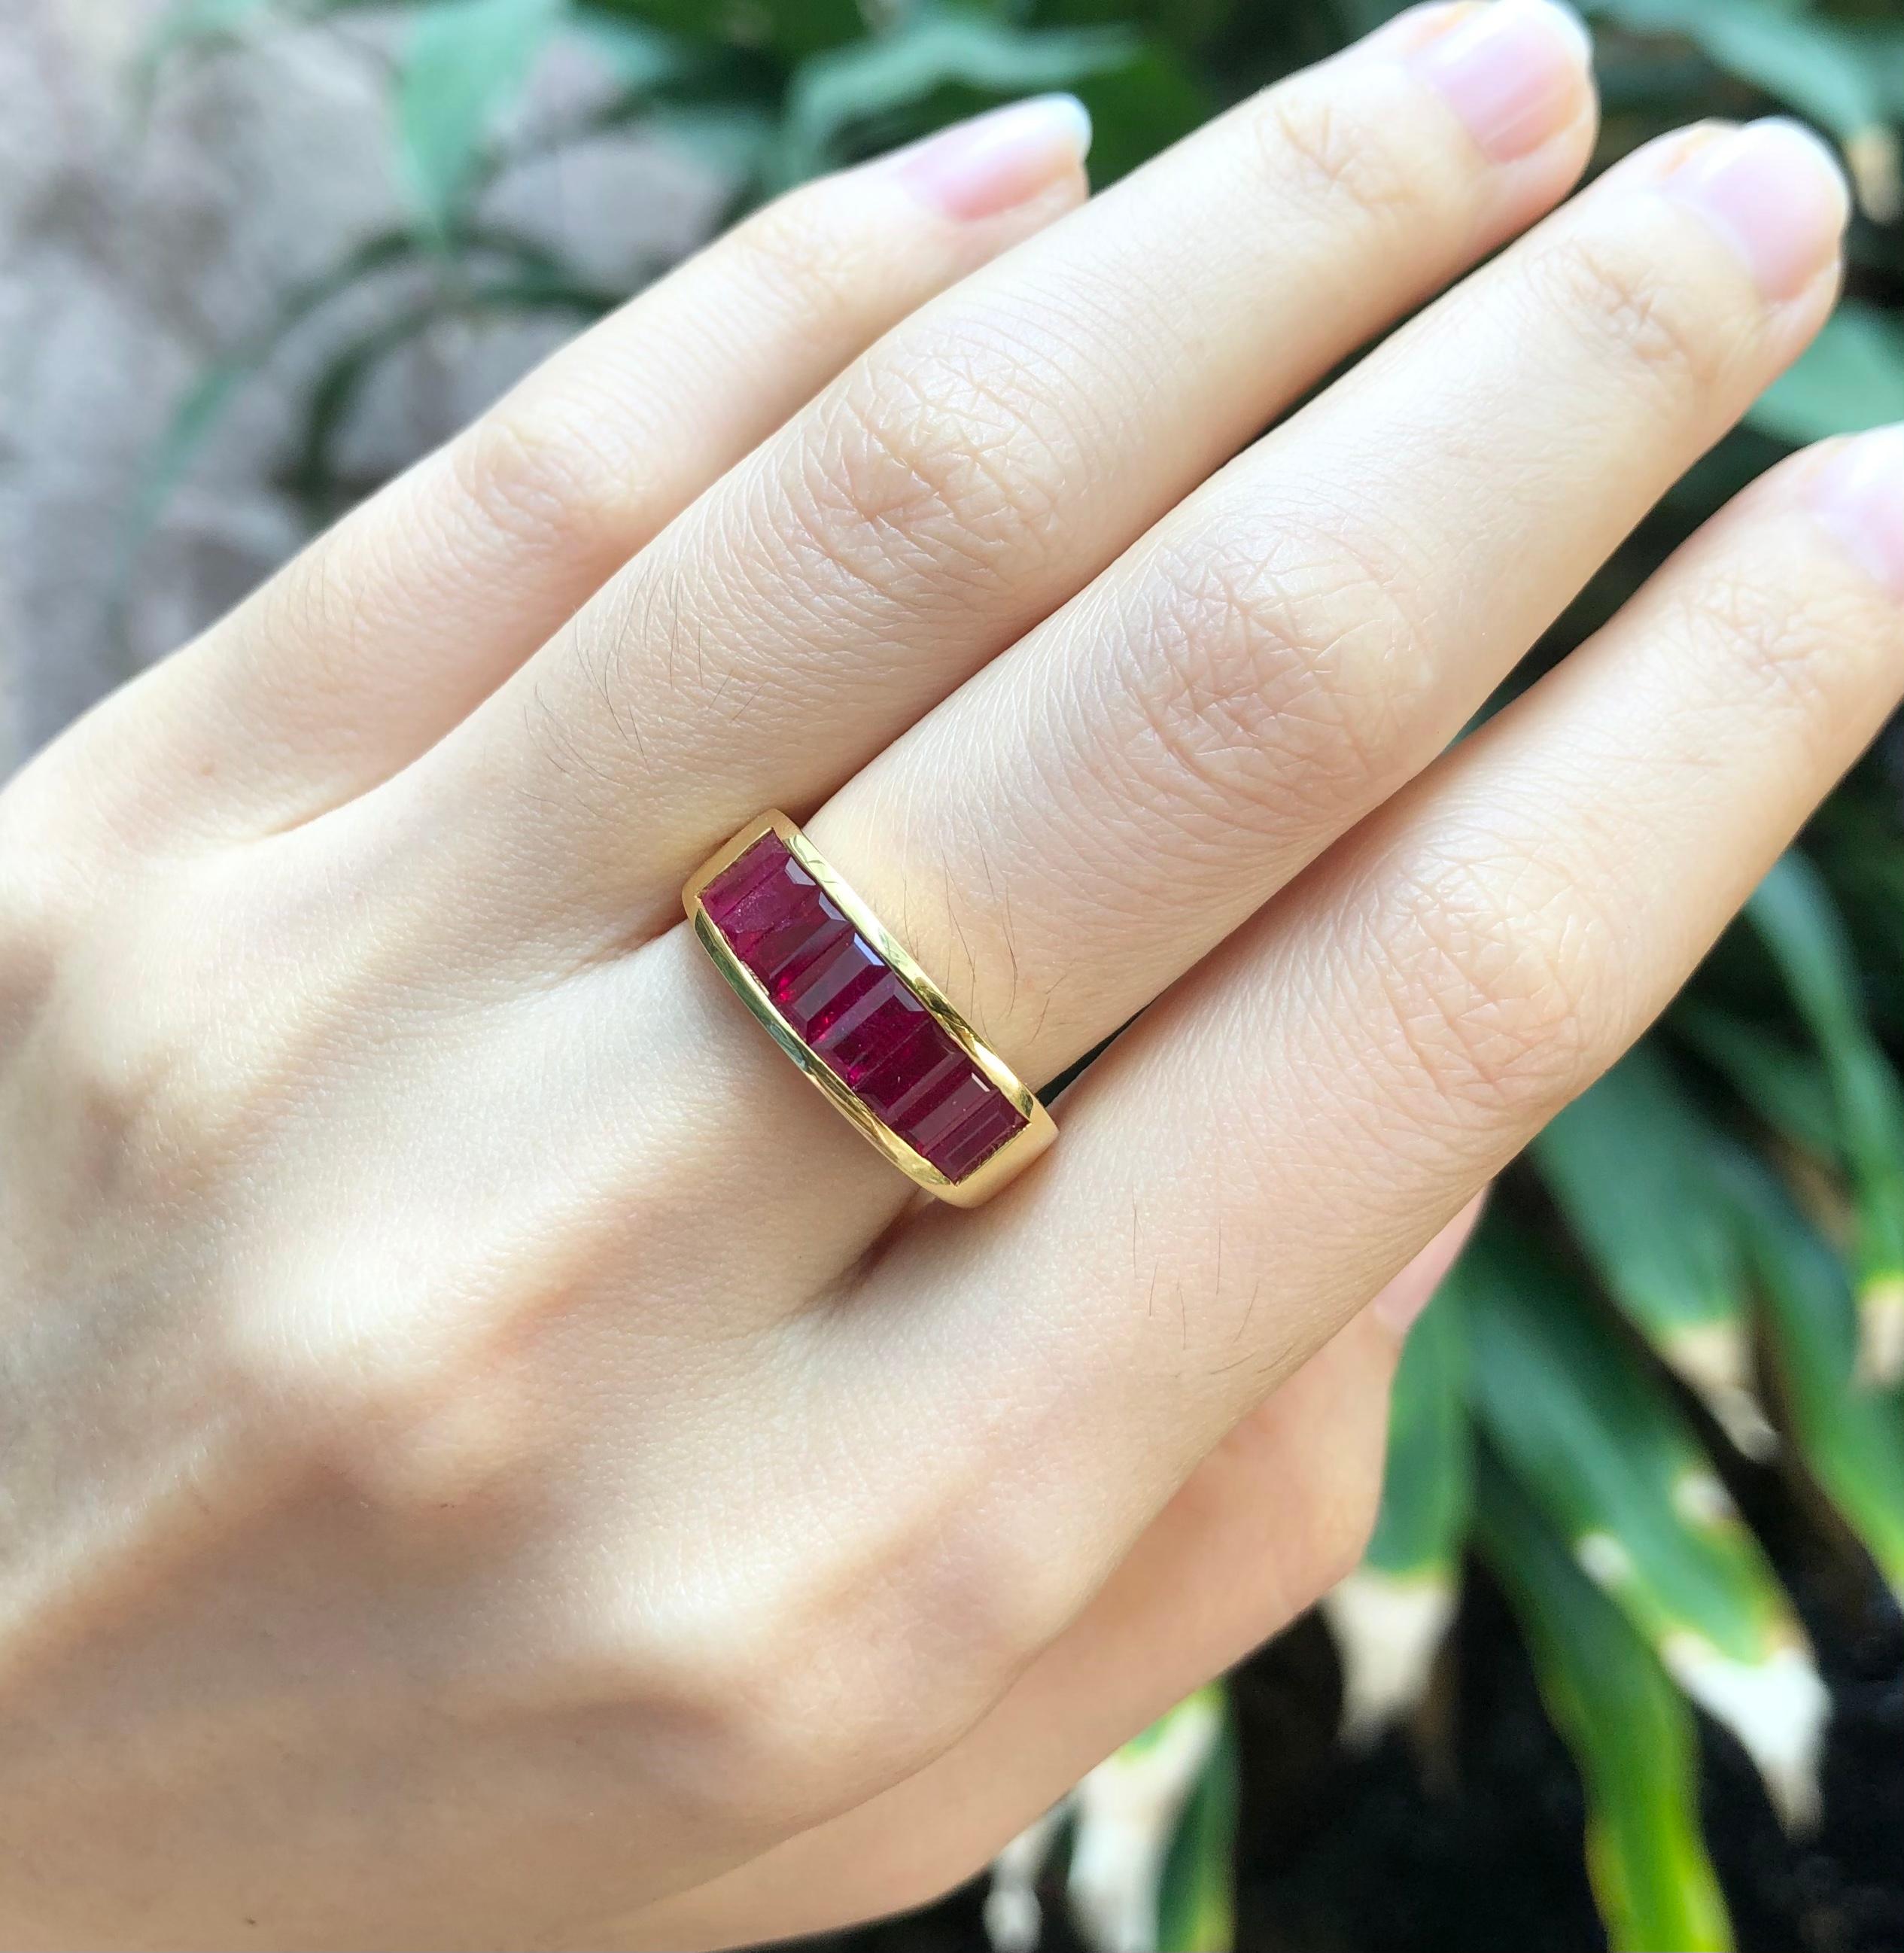 Ruby 2.21 carats Ring set in 18 Karat Gold Settings

Width:  1.8 cm 
Length:  0.6 cm
Ring Size: 54
Total Weight: 7.69 grams

